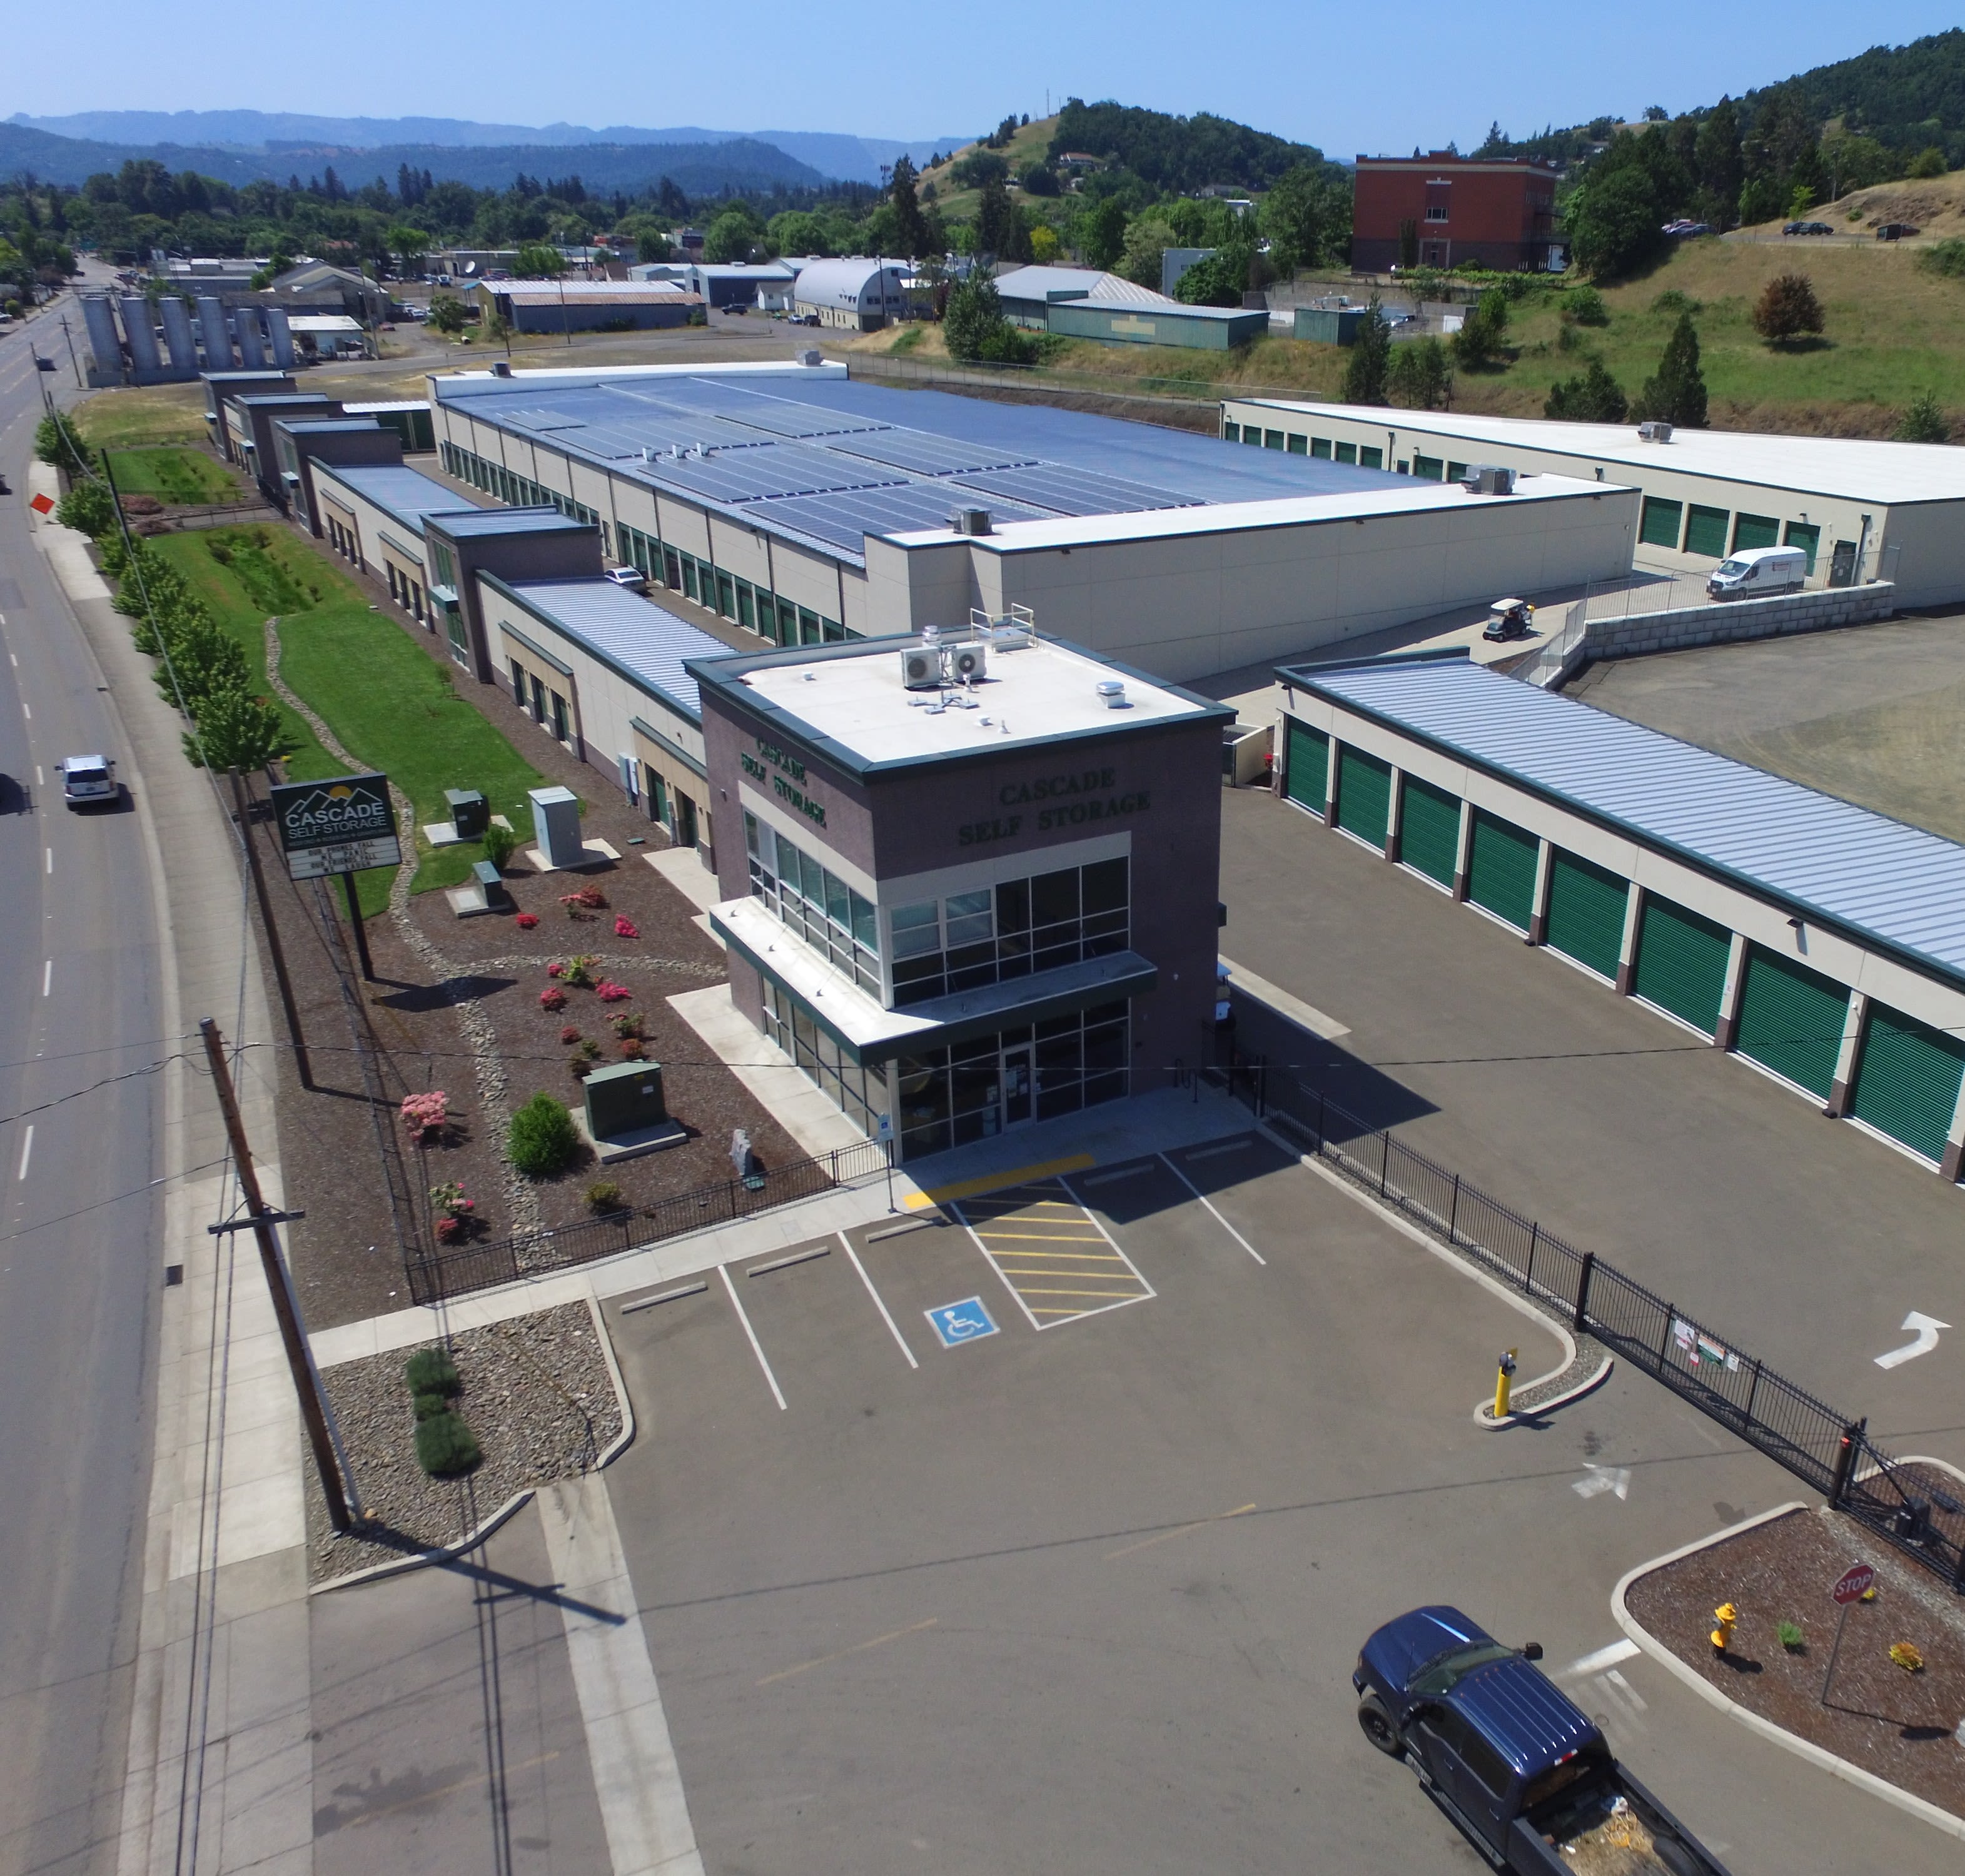 Map and directions to Cascade Self Storage in Roseburg, Oregon